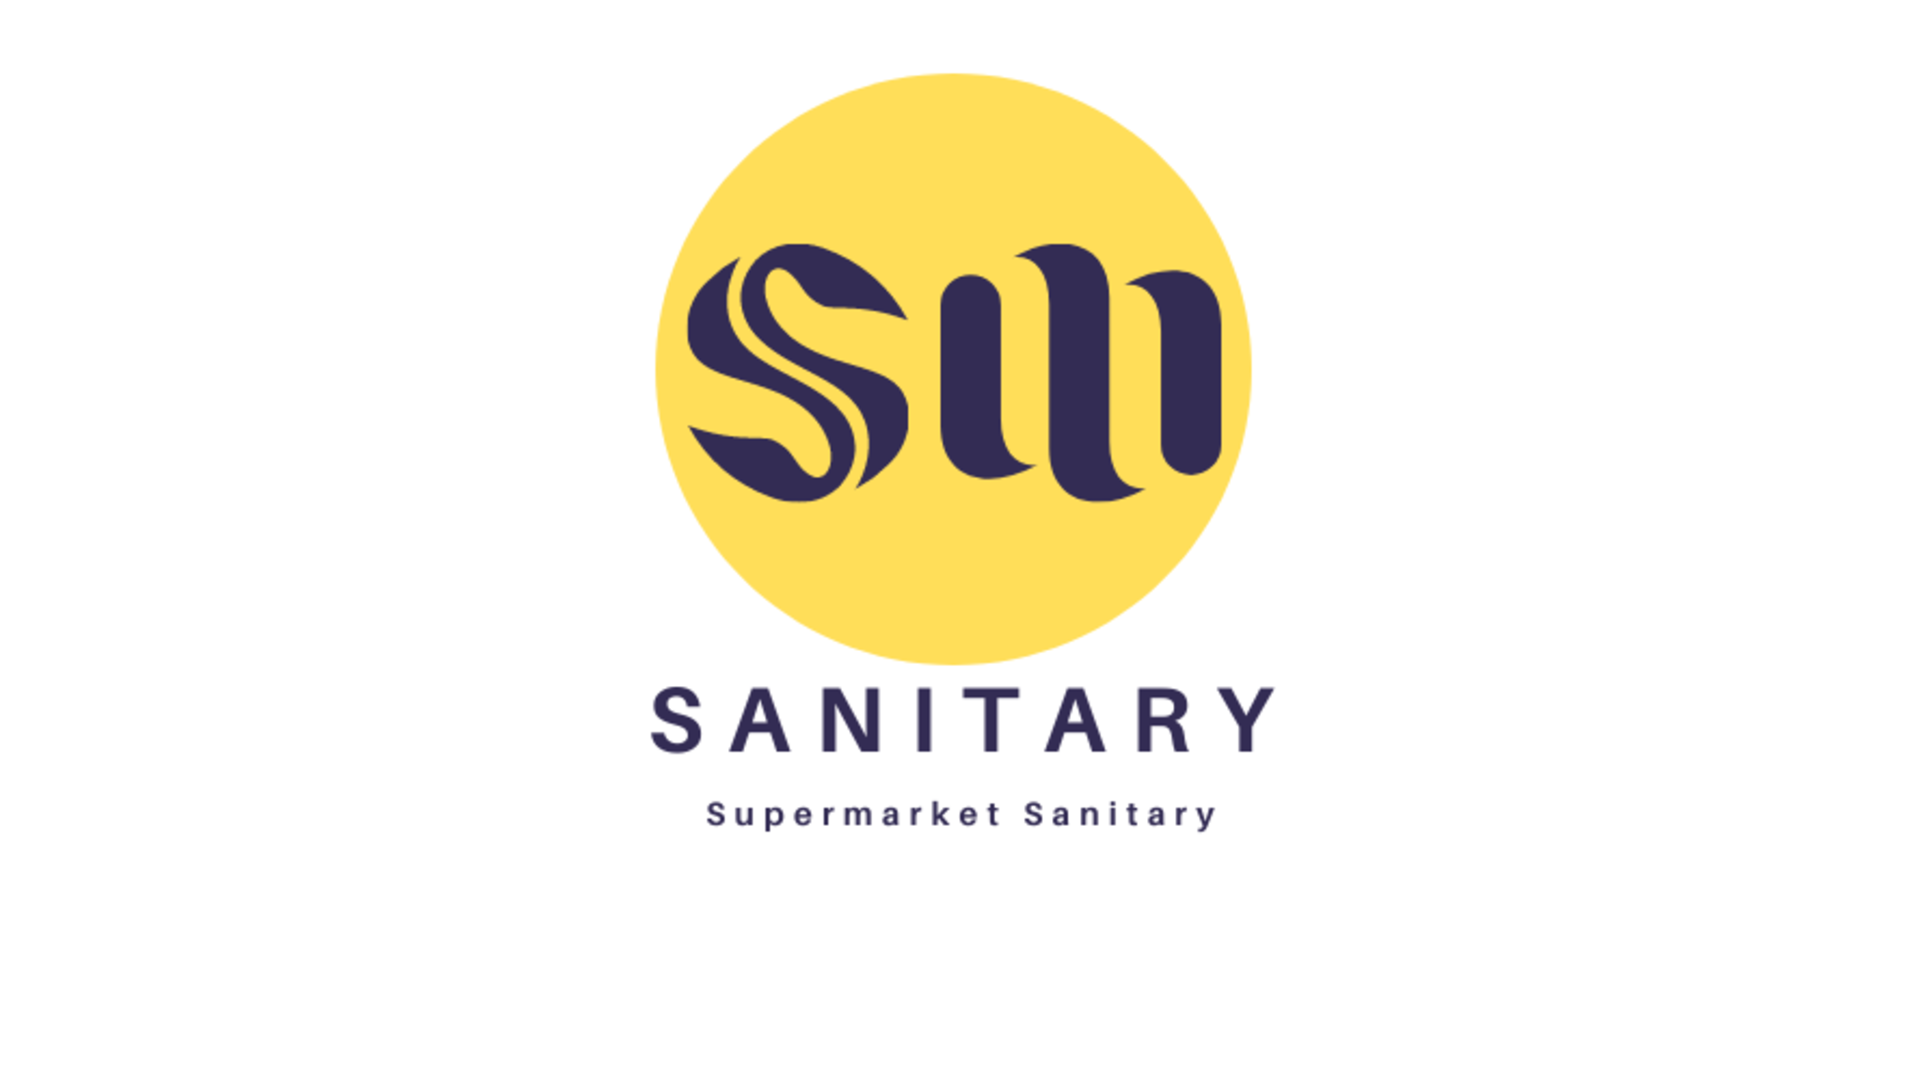 SM Sanitary Official Store